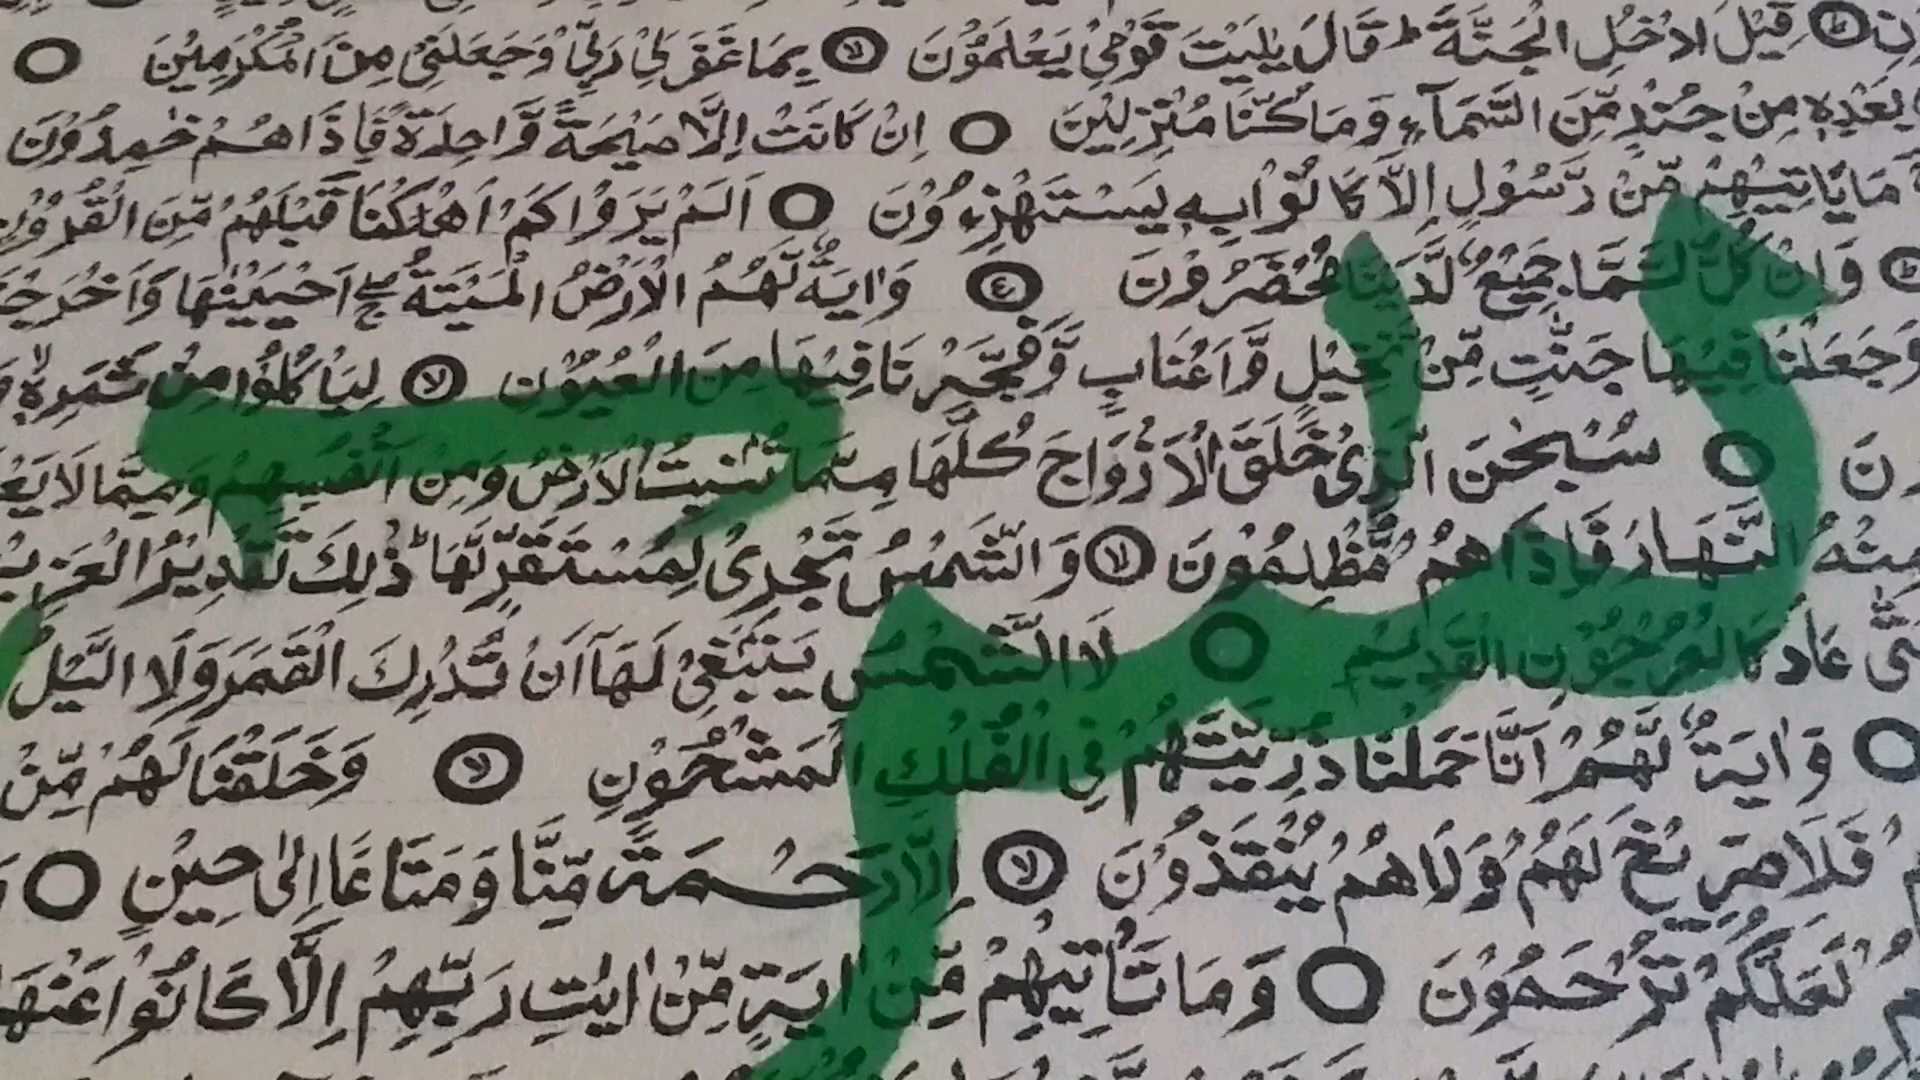 Anil Kumar Chauhan, a calligrapher with Quranic verses and blessed names